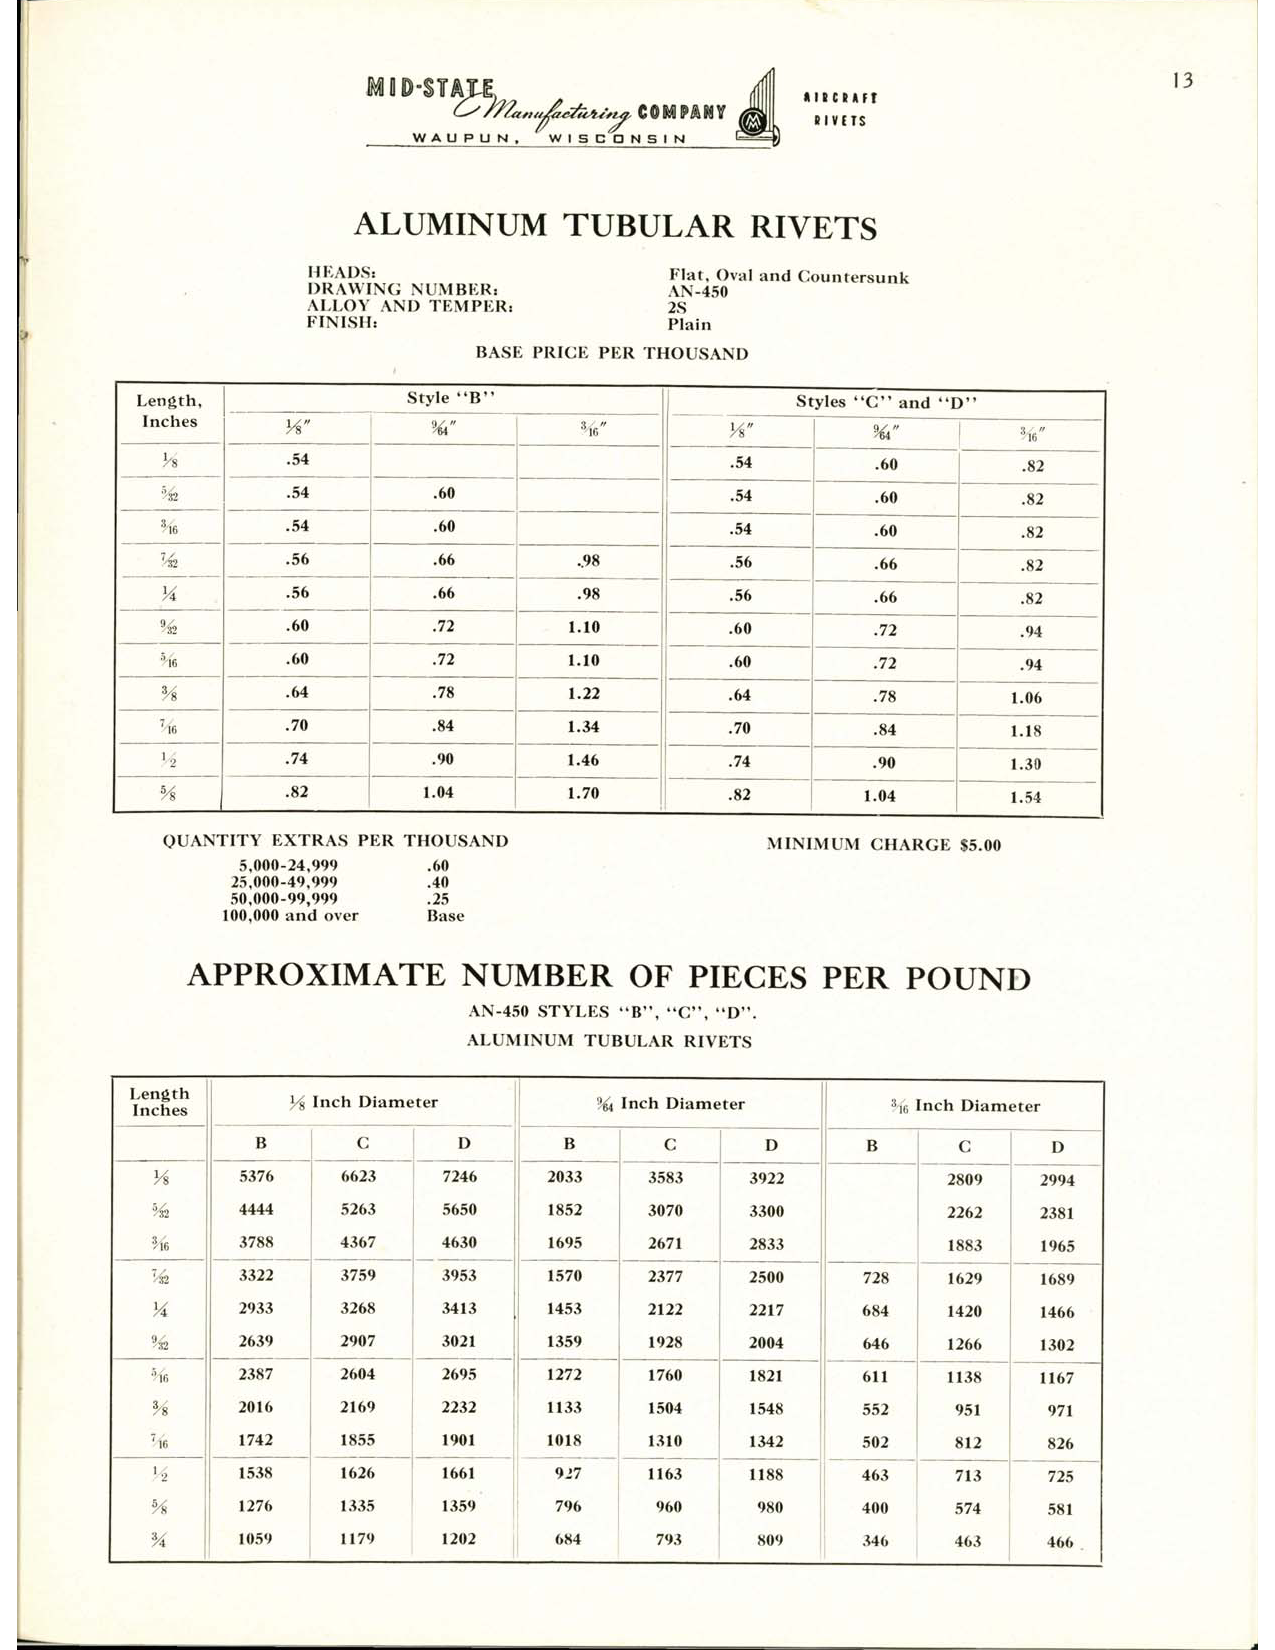 Sample page 13 from AirCorps Library document: Aircraft Rivets - Mid-State Manufacturing Co